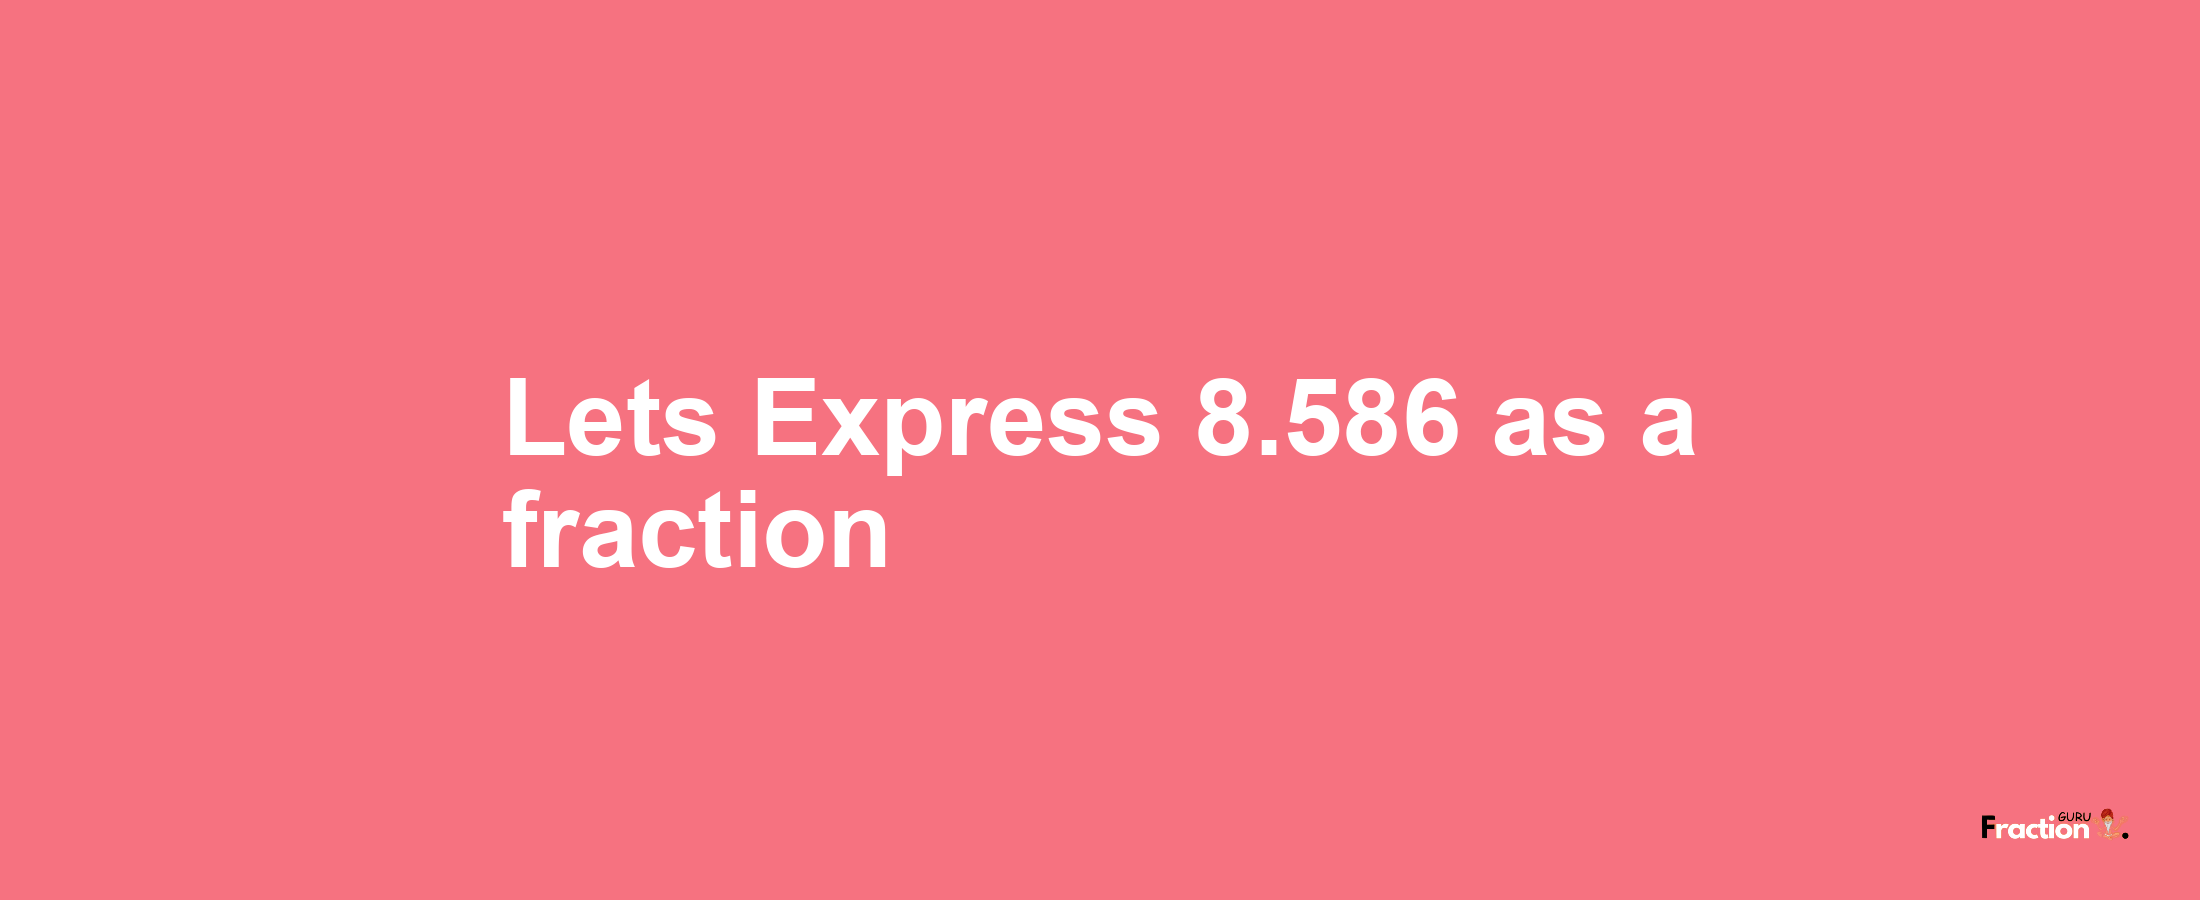 Lets Express 8.586 as afraction